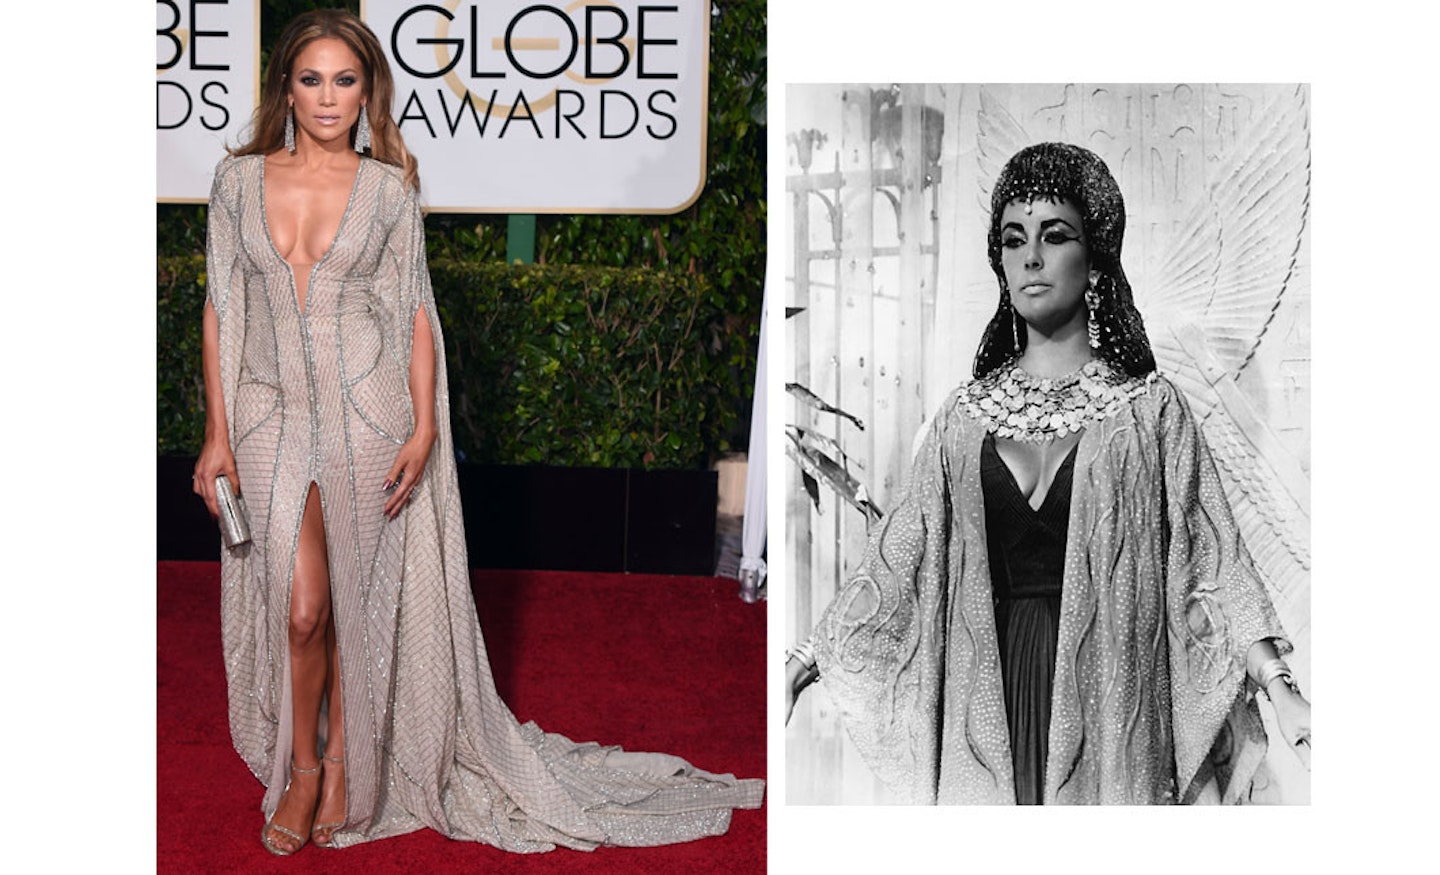 Cleopatra coming at ya! Oh wait its just JLO doing her leggy/booby thing. As. Per.